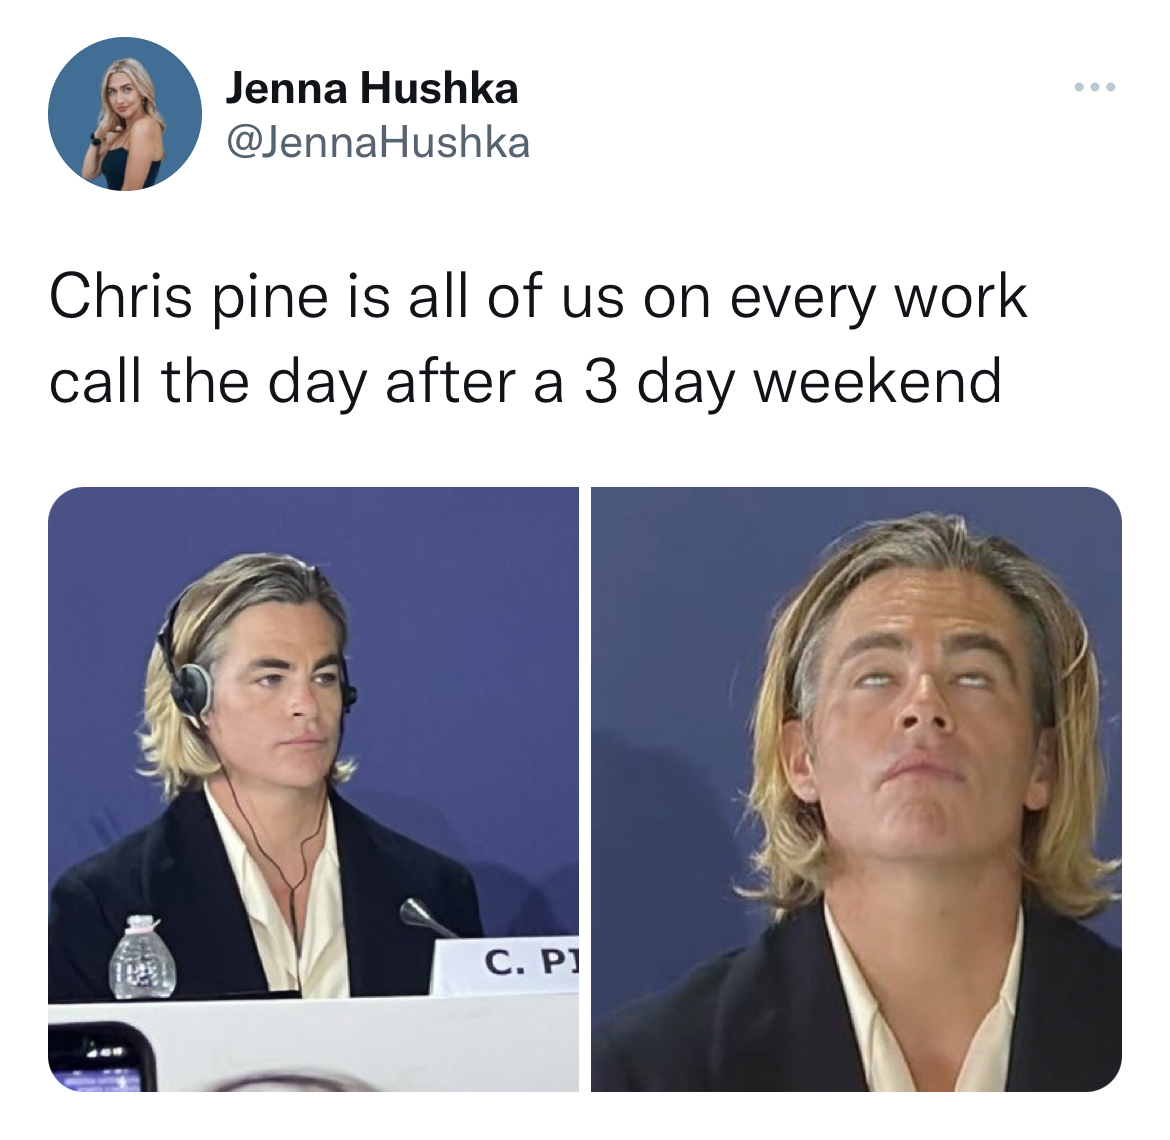 Chris Pine Venice Film Festival Memes - head - Jenna Hushka Chris pine is all of us on every work call the day after a 3 day weekend C. Pl www